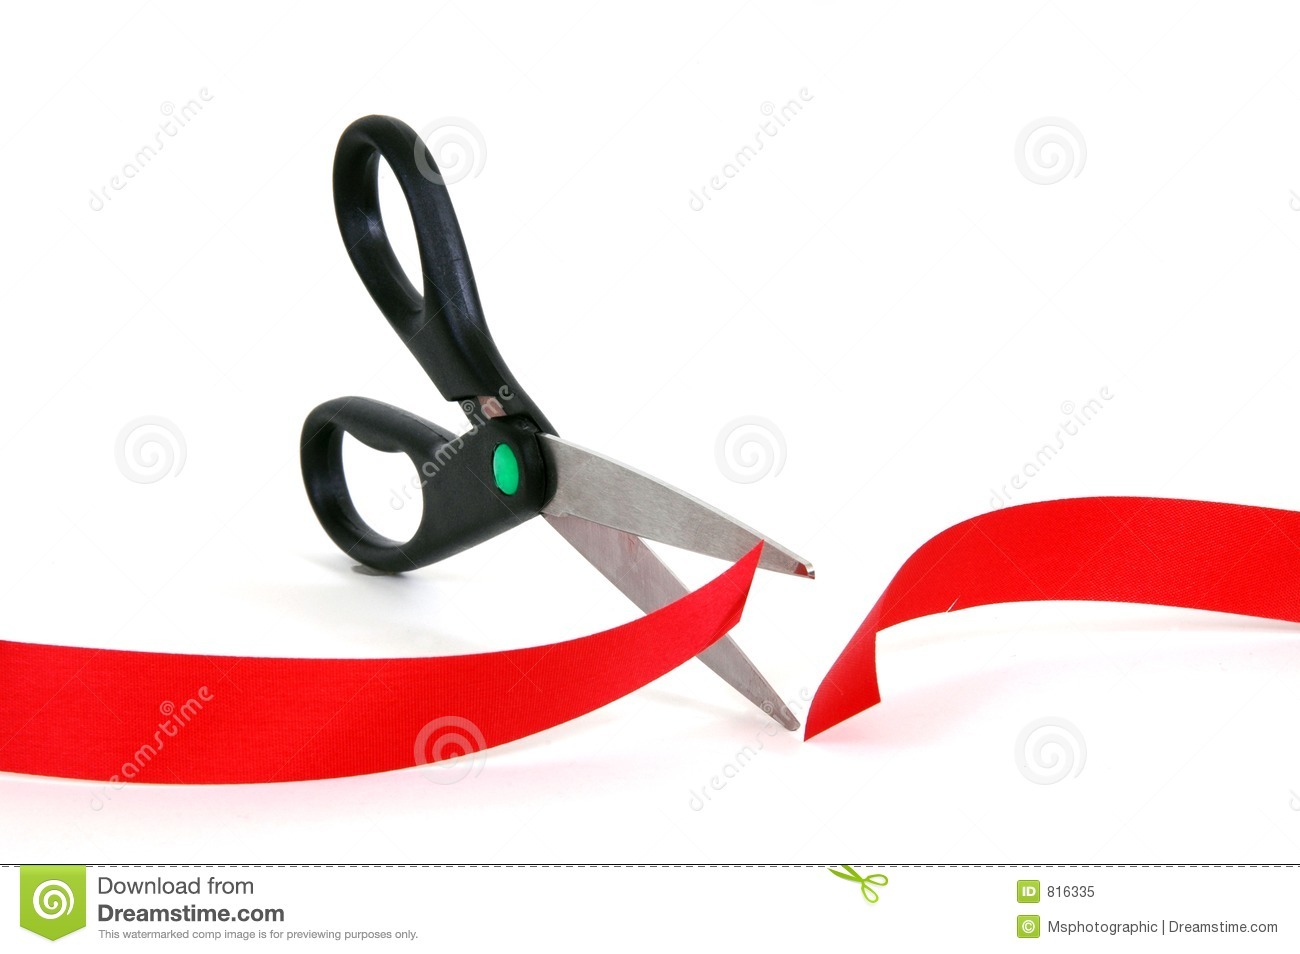 Cutting Red Tape Royalty Free Stock Photo   Image  816335